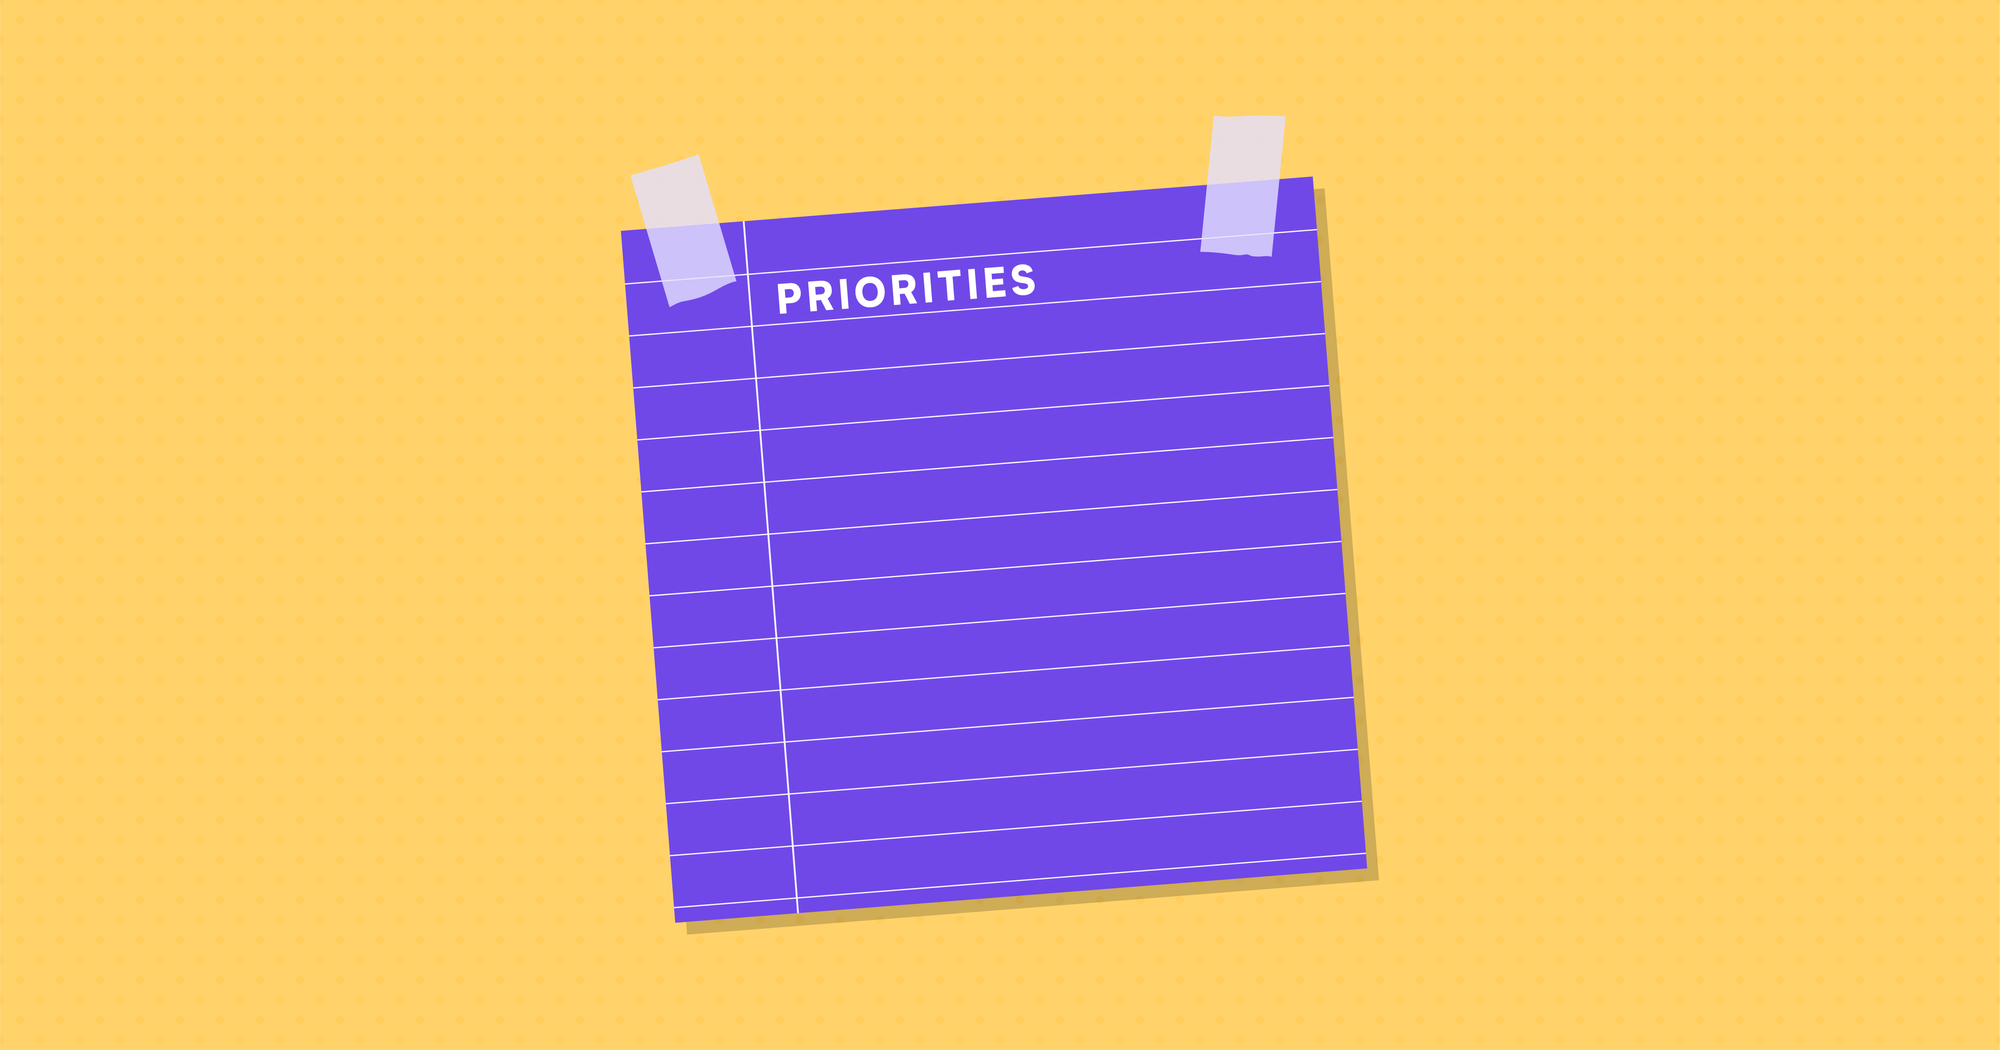 Plan your tasks based on priority levels